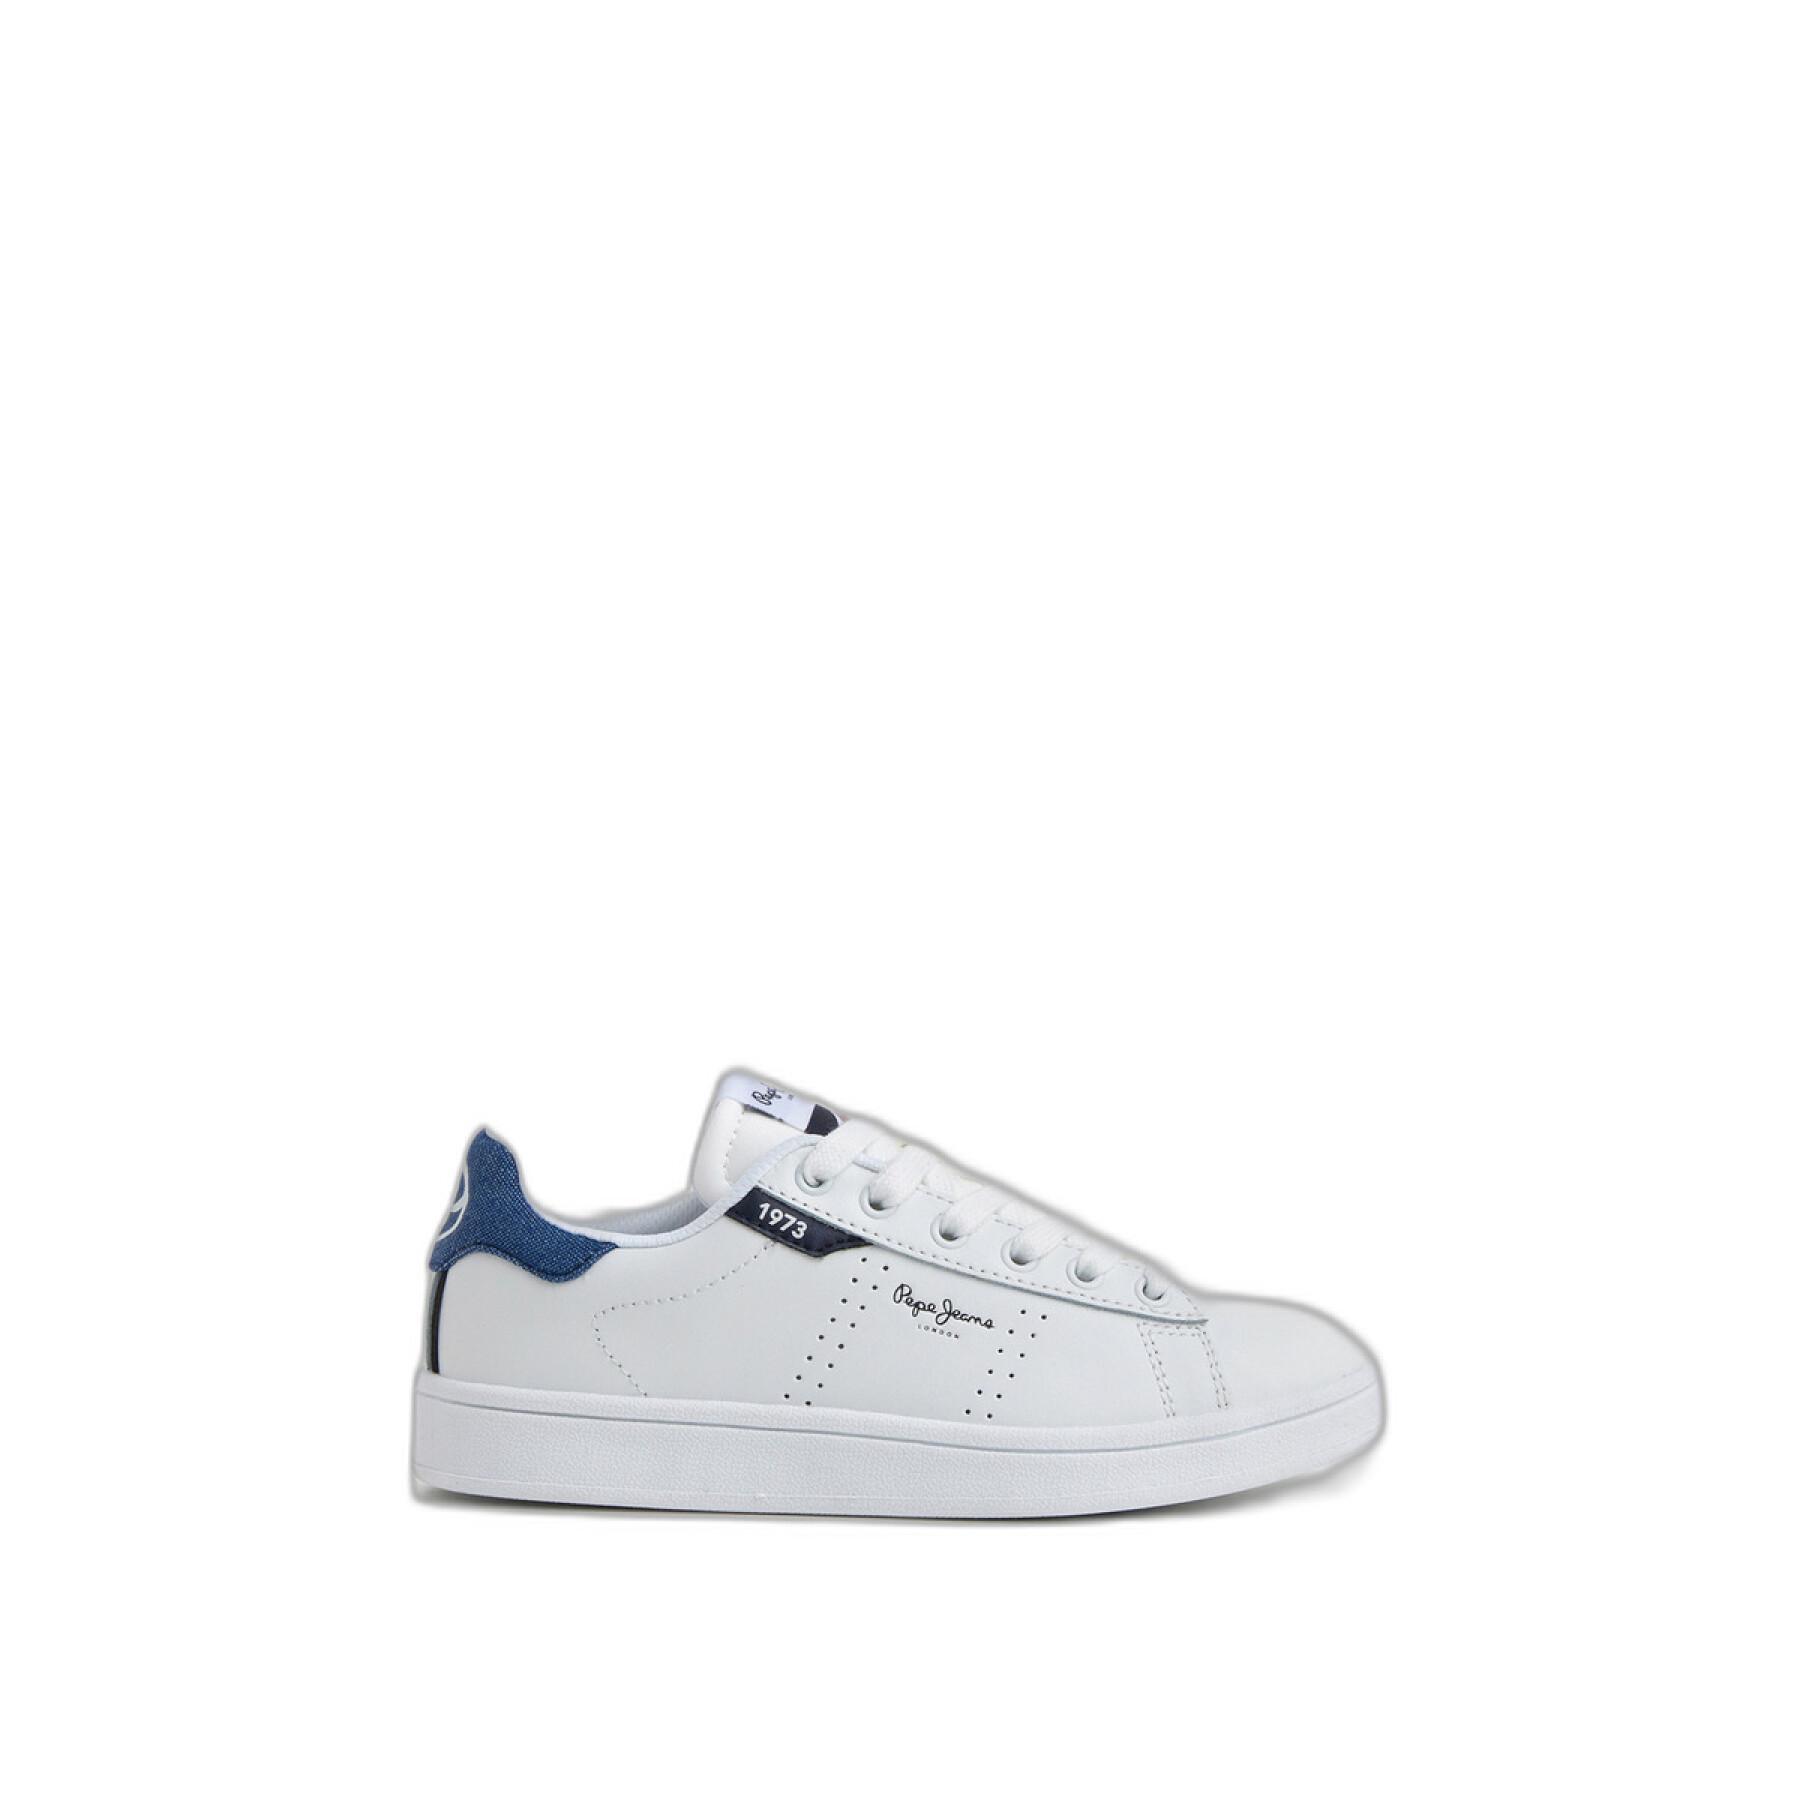 Children's sneakers Pepe Jeans Player Basic